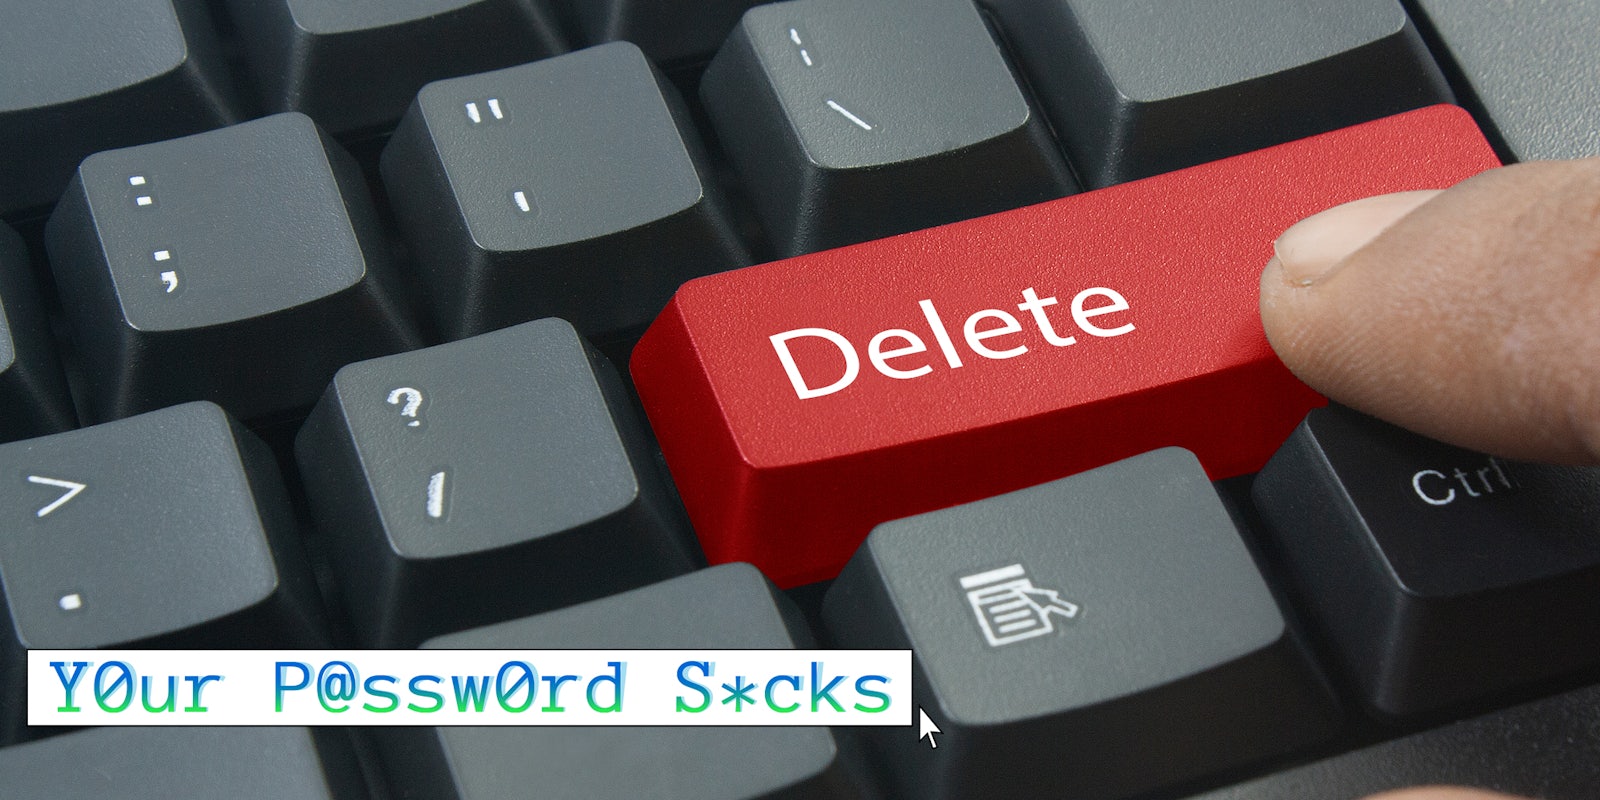 A person pressing a red delete key. In the bottom left corner is a 'Your Password Sucks' column logo in a web_crawlr font.